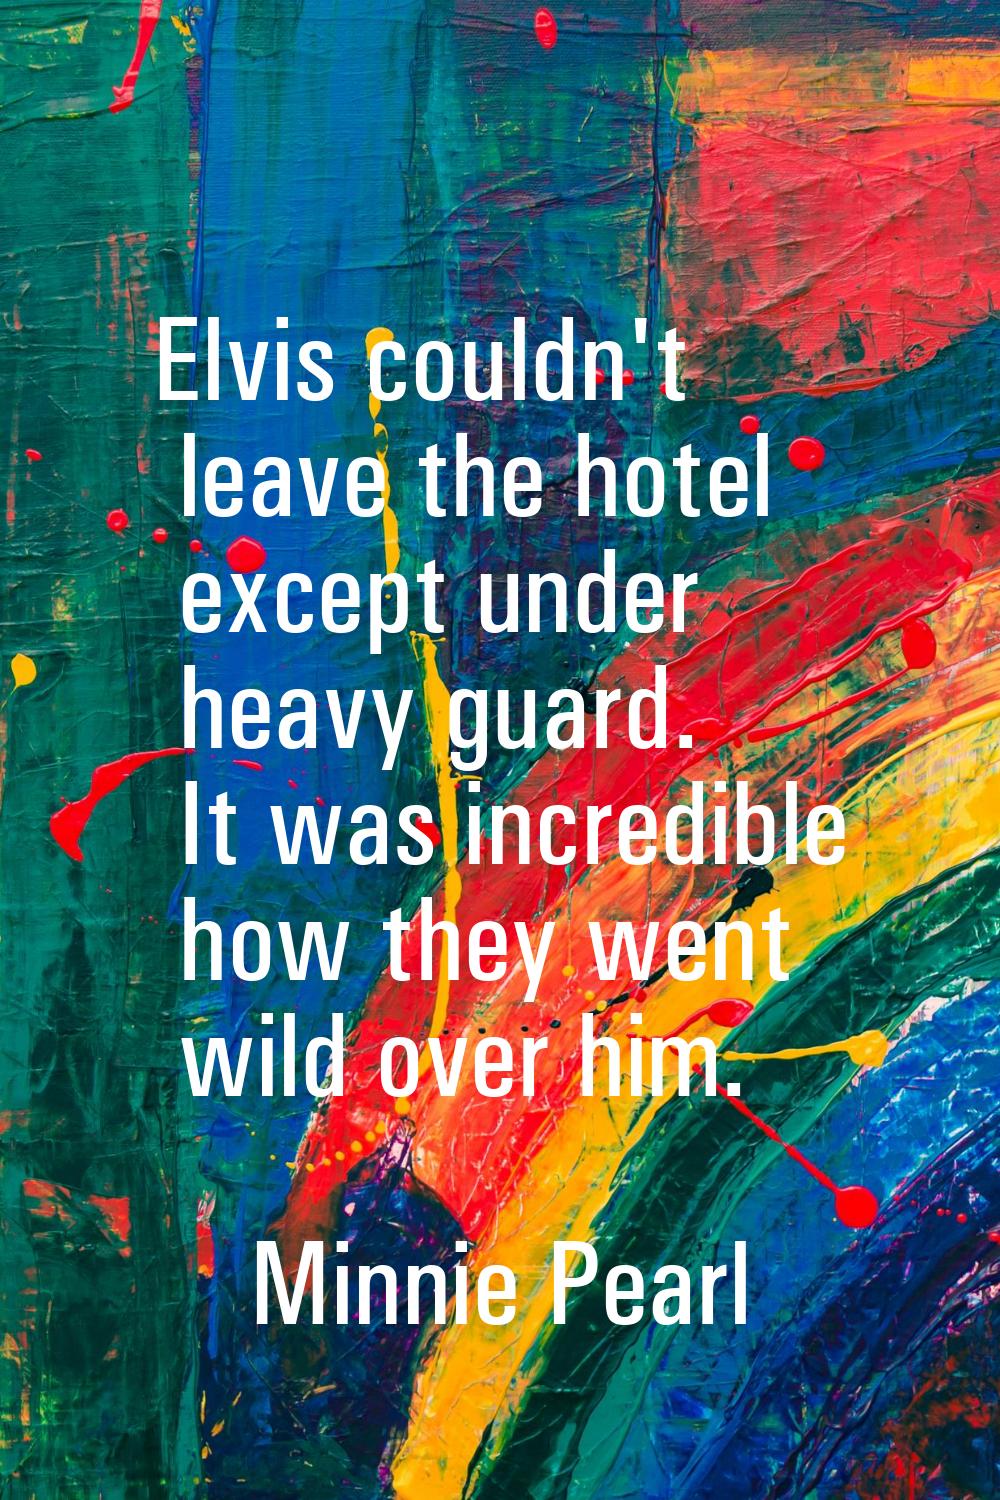 Elvis couldn't leave the hotel except under heavy guard. It was incredible how they went wild over 